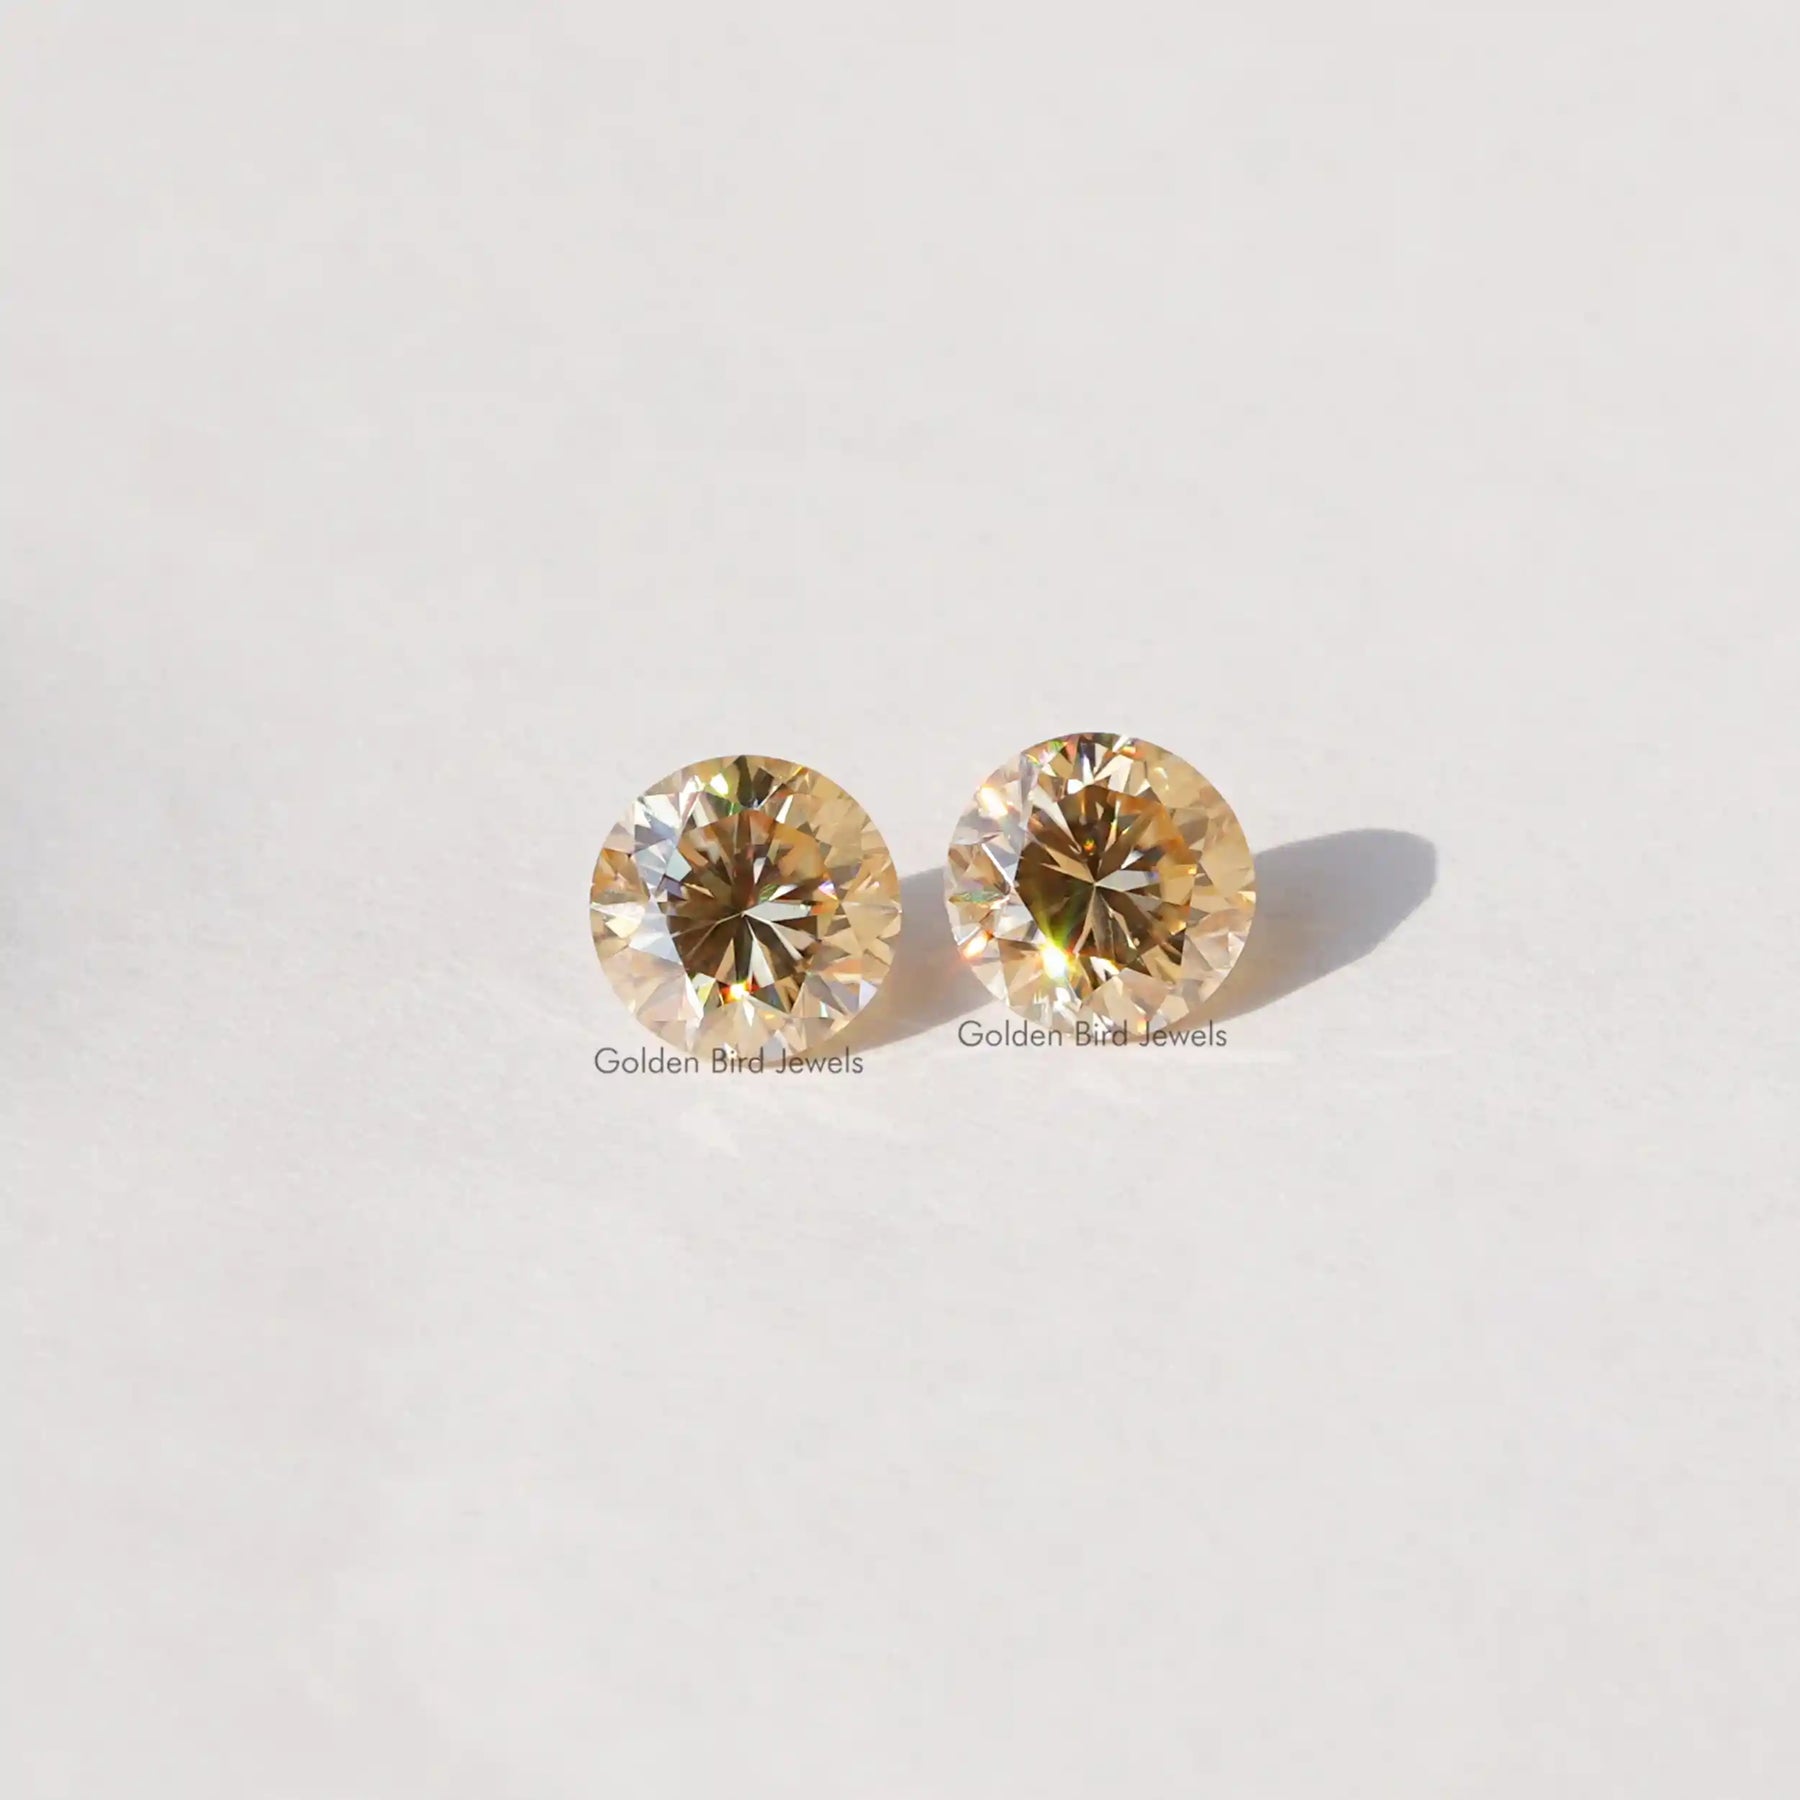 [Front view of round cut moissanite loose stones made of champagne color]-[Golden Bird Jewels]